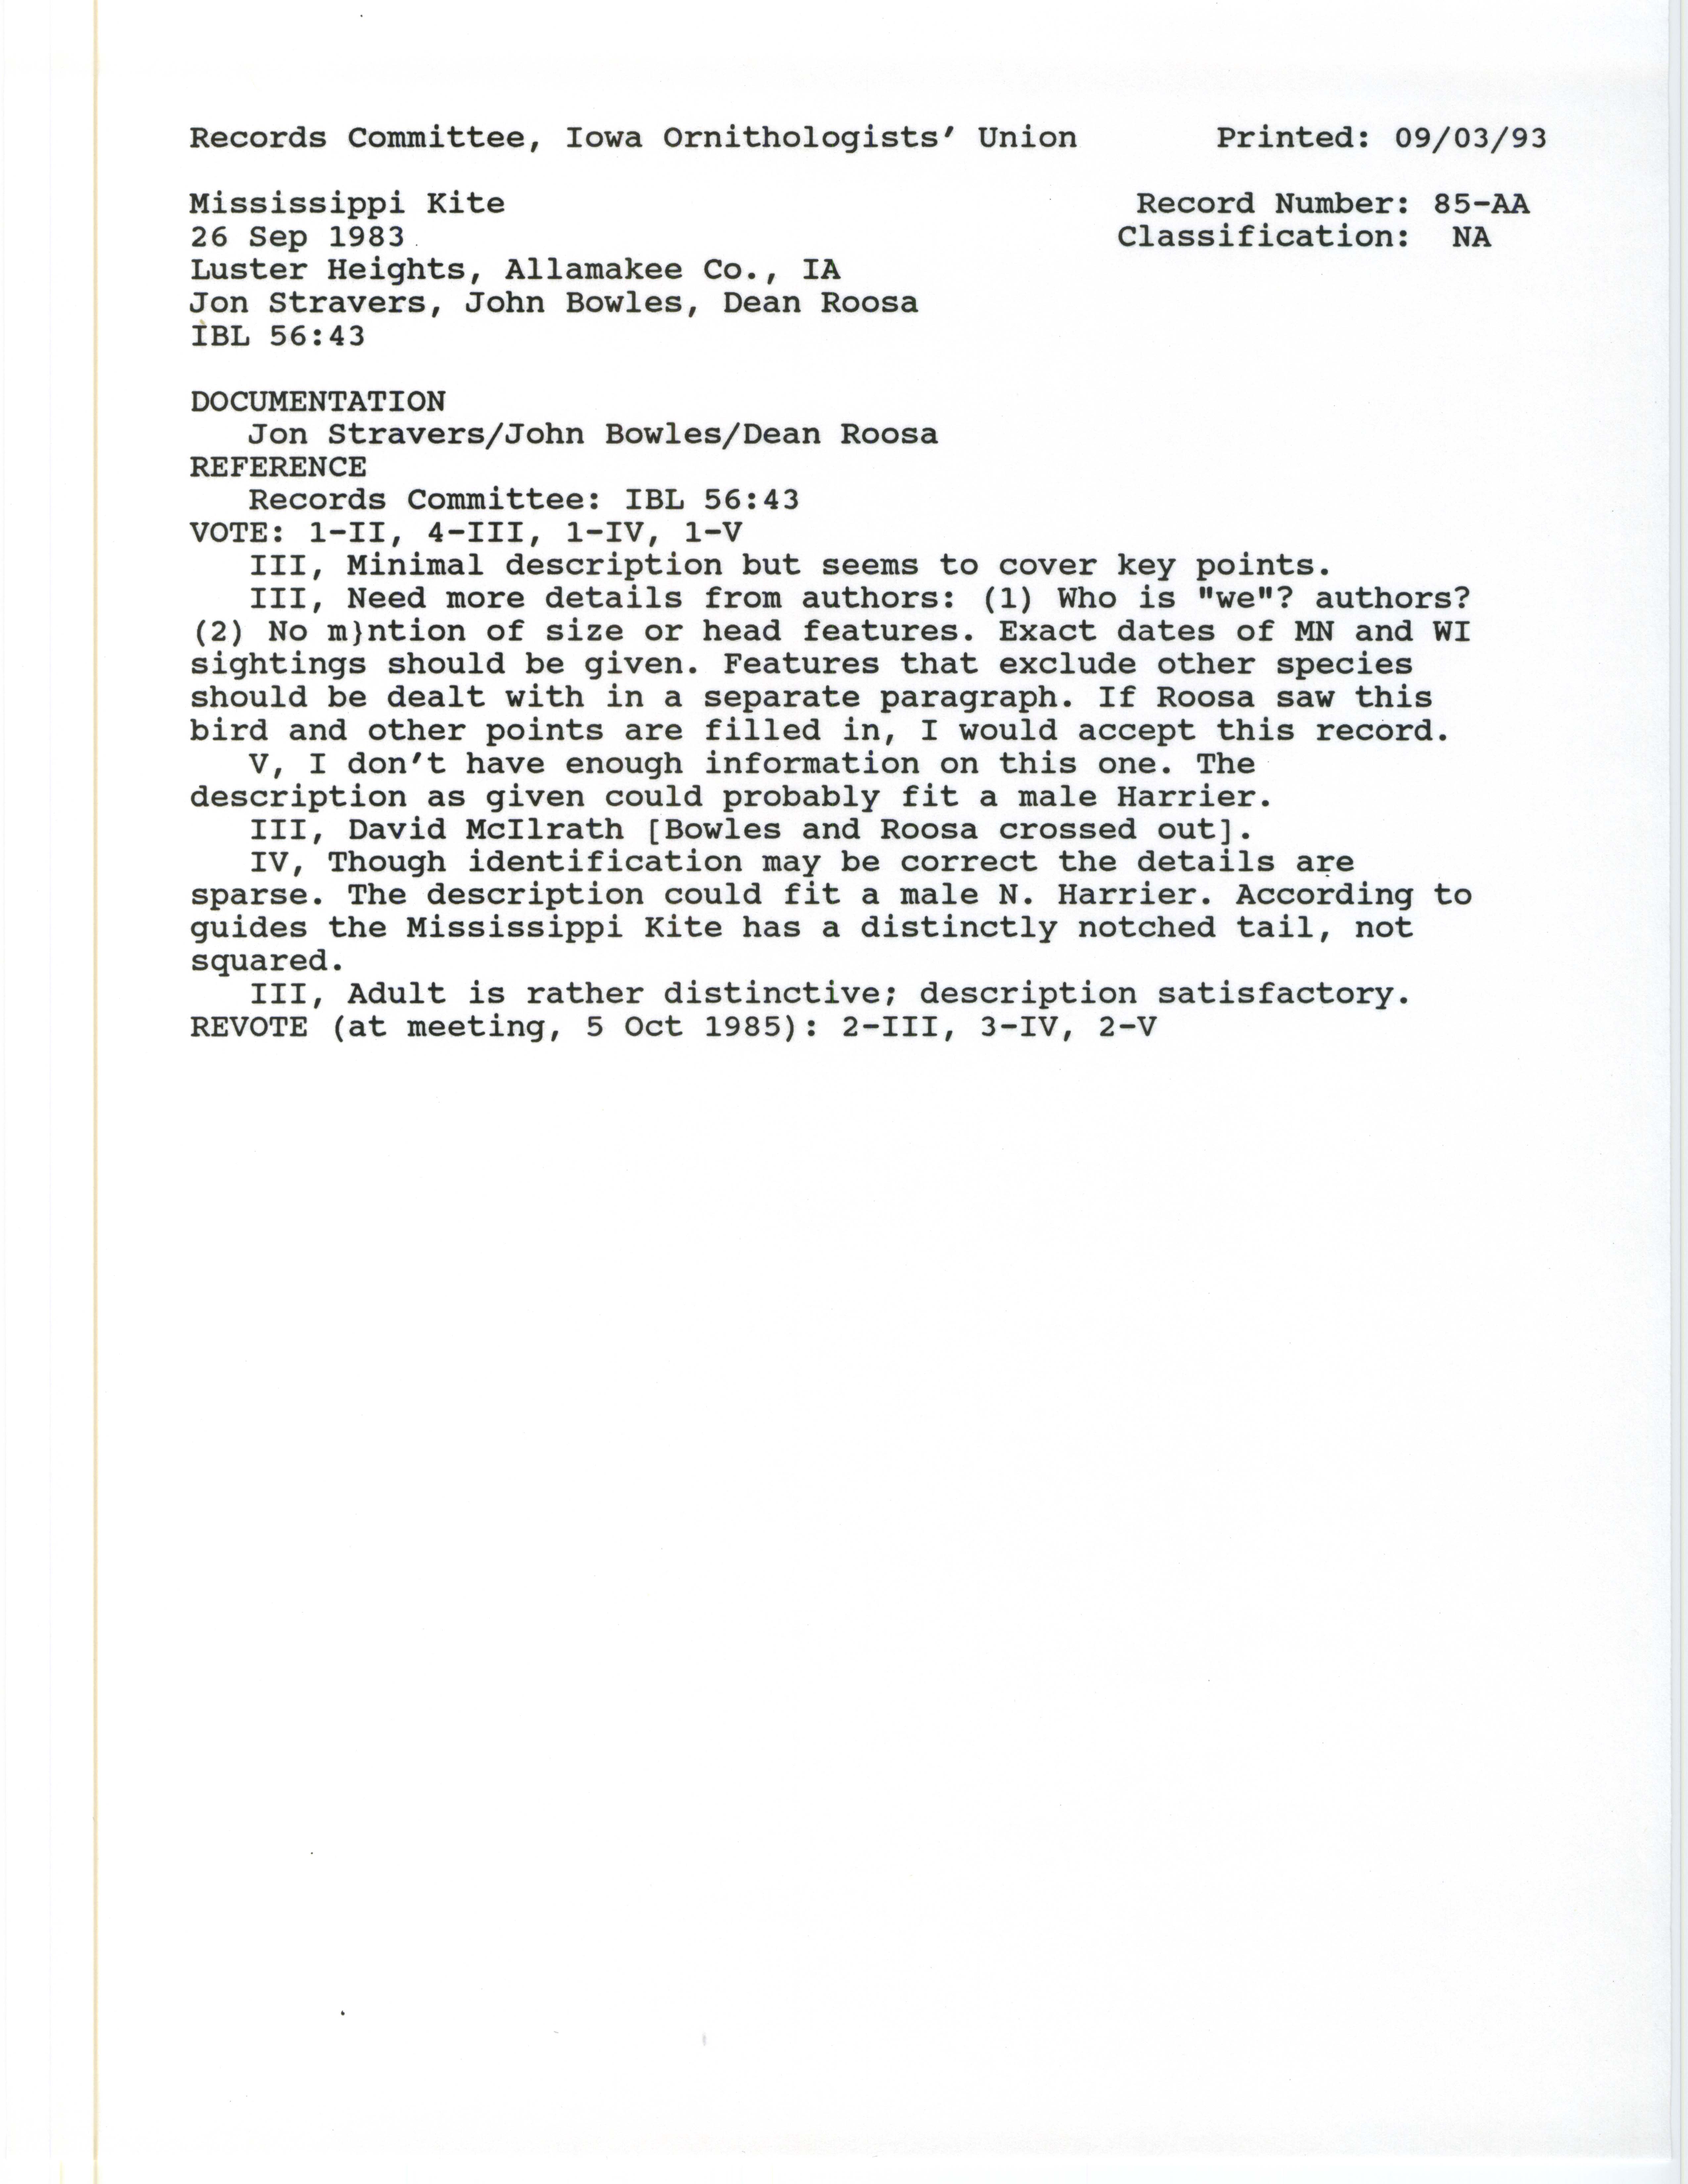 Records Committee review for rare bird sighting of Mississippi Kite near Luster Heights, 1983